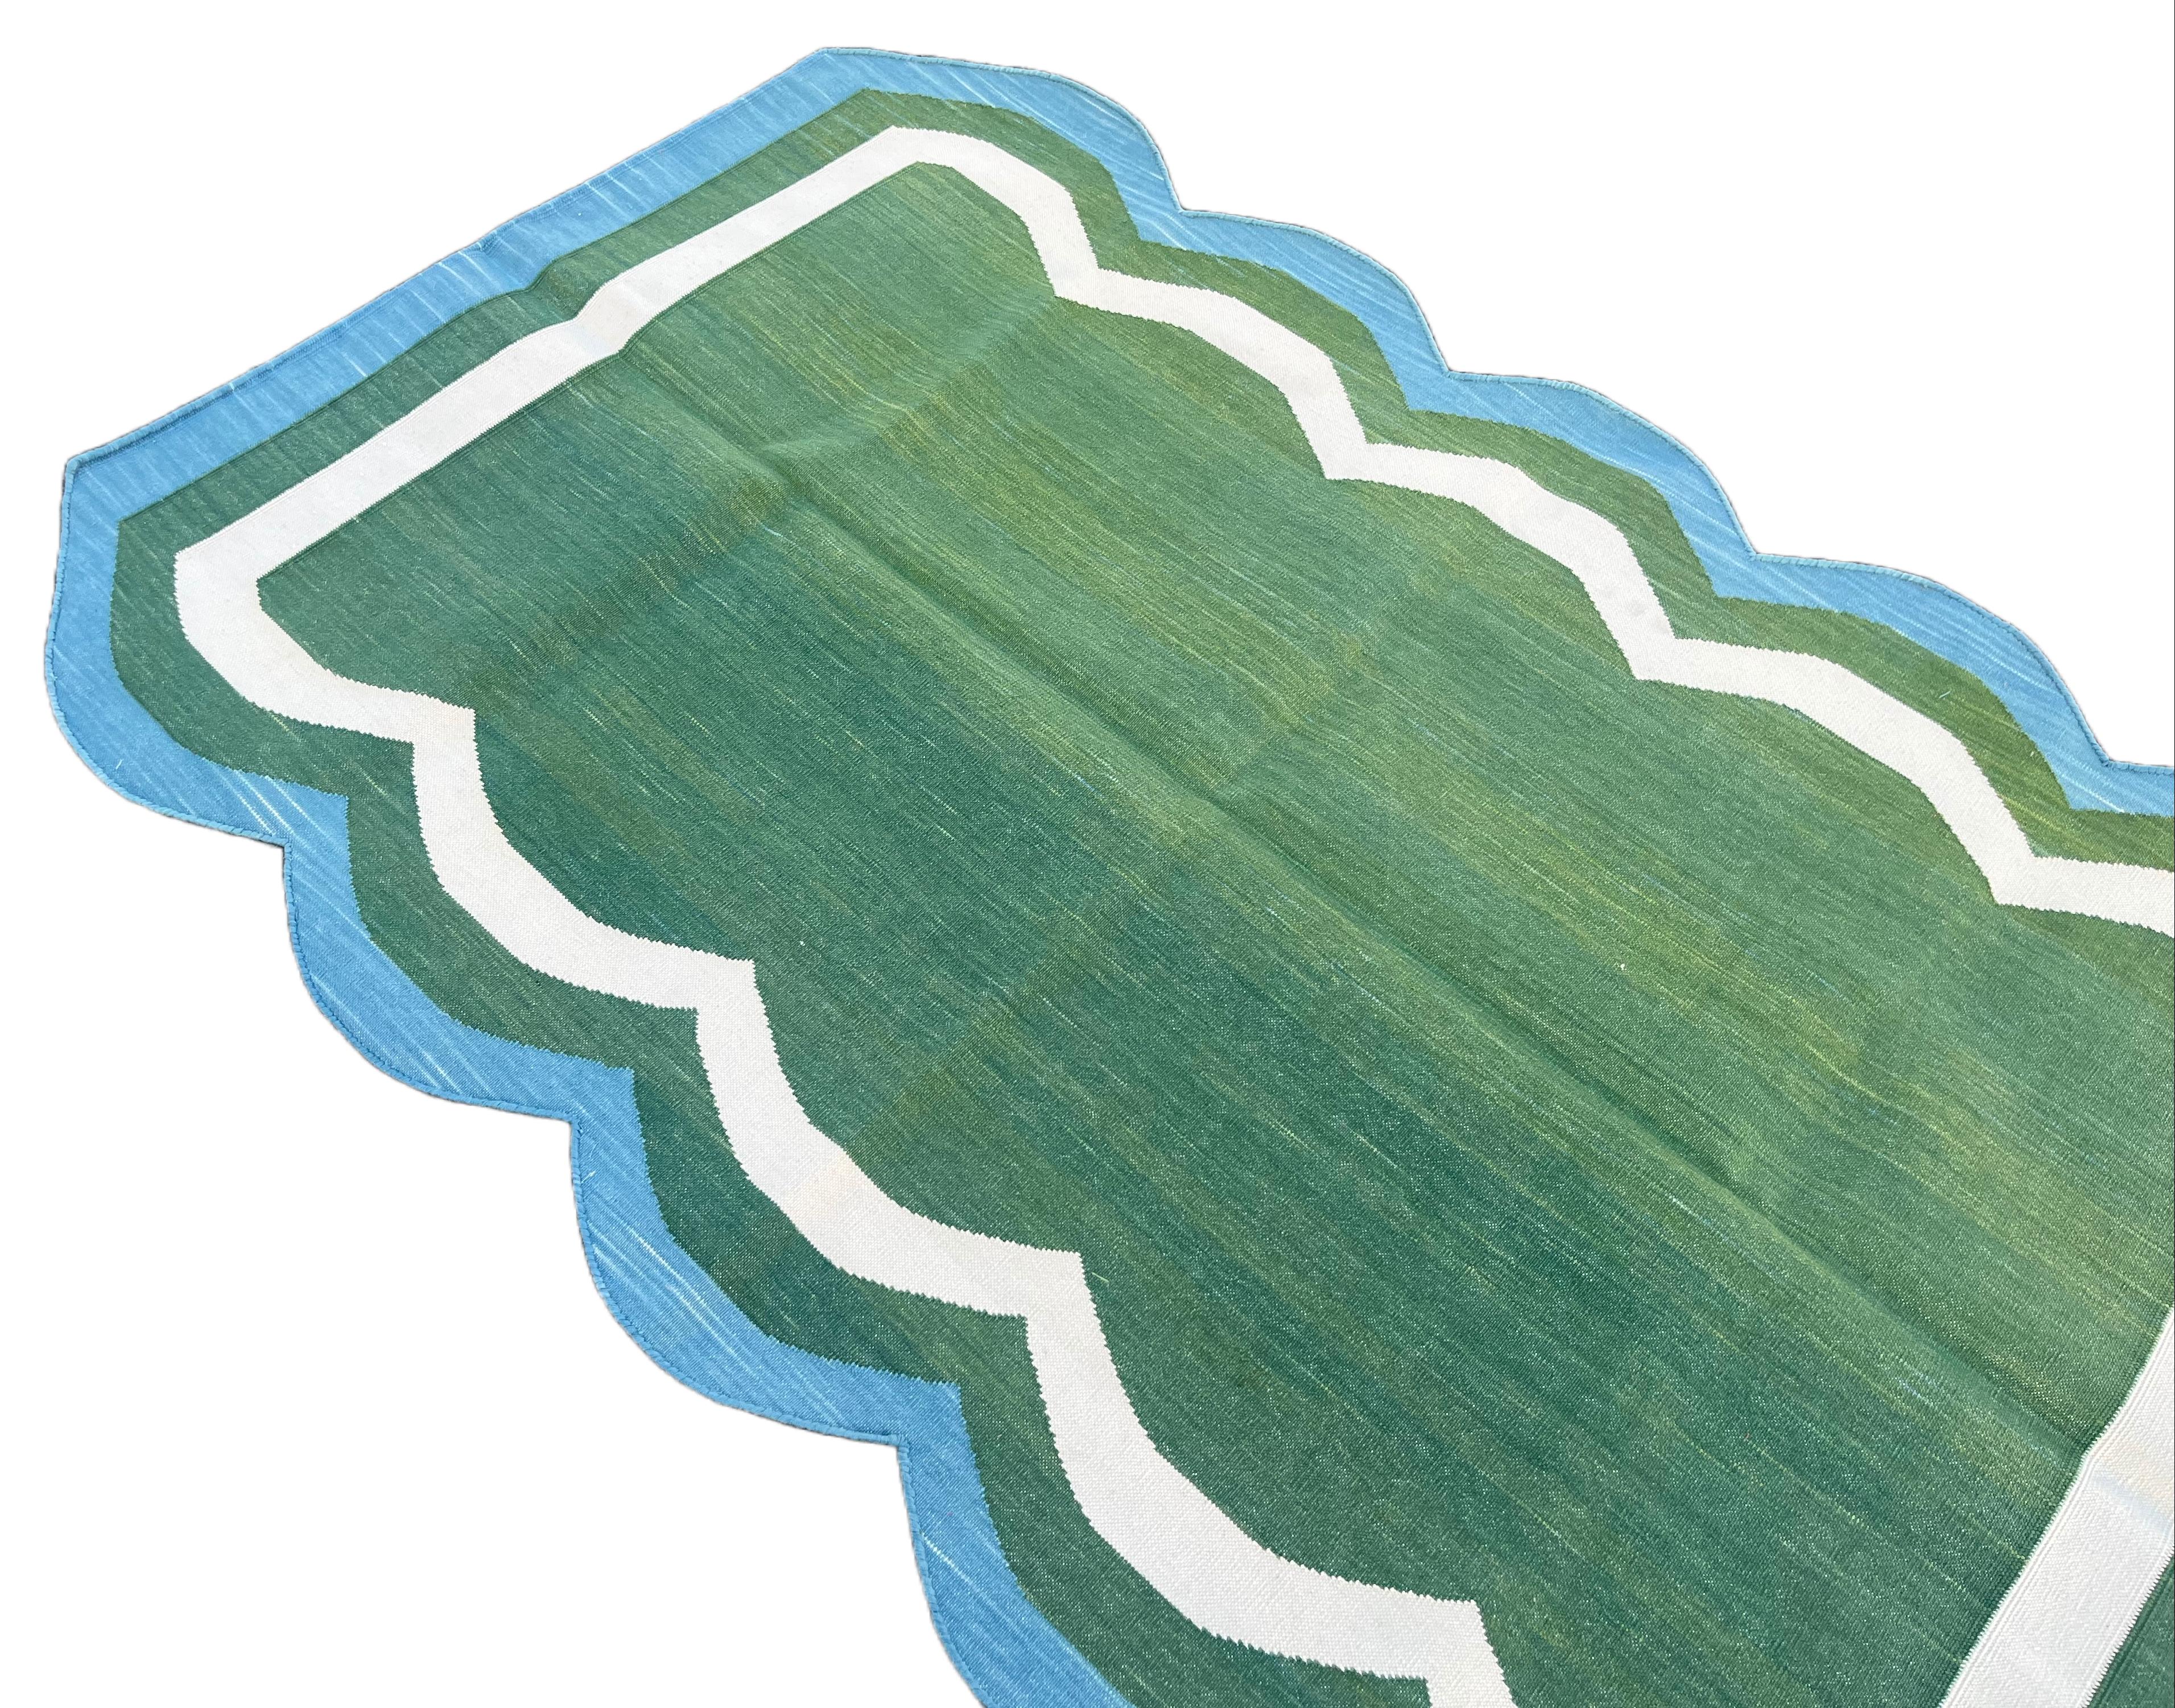 Hand-Woven Handmade Cotton Area Flat Weave Rug, 3x5 Green And Blue Scalloped Kilim Dhurrie For Sale